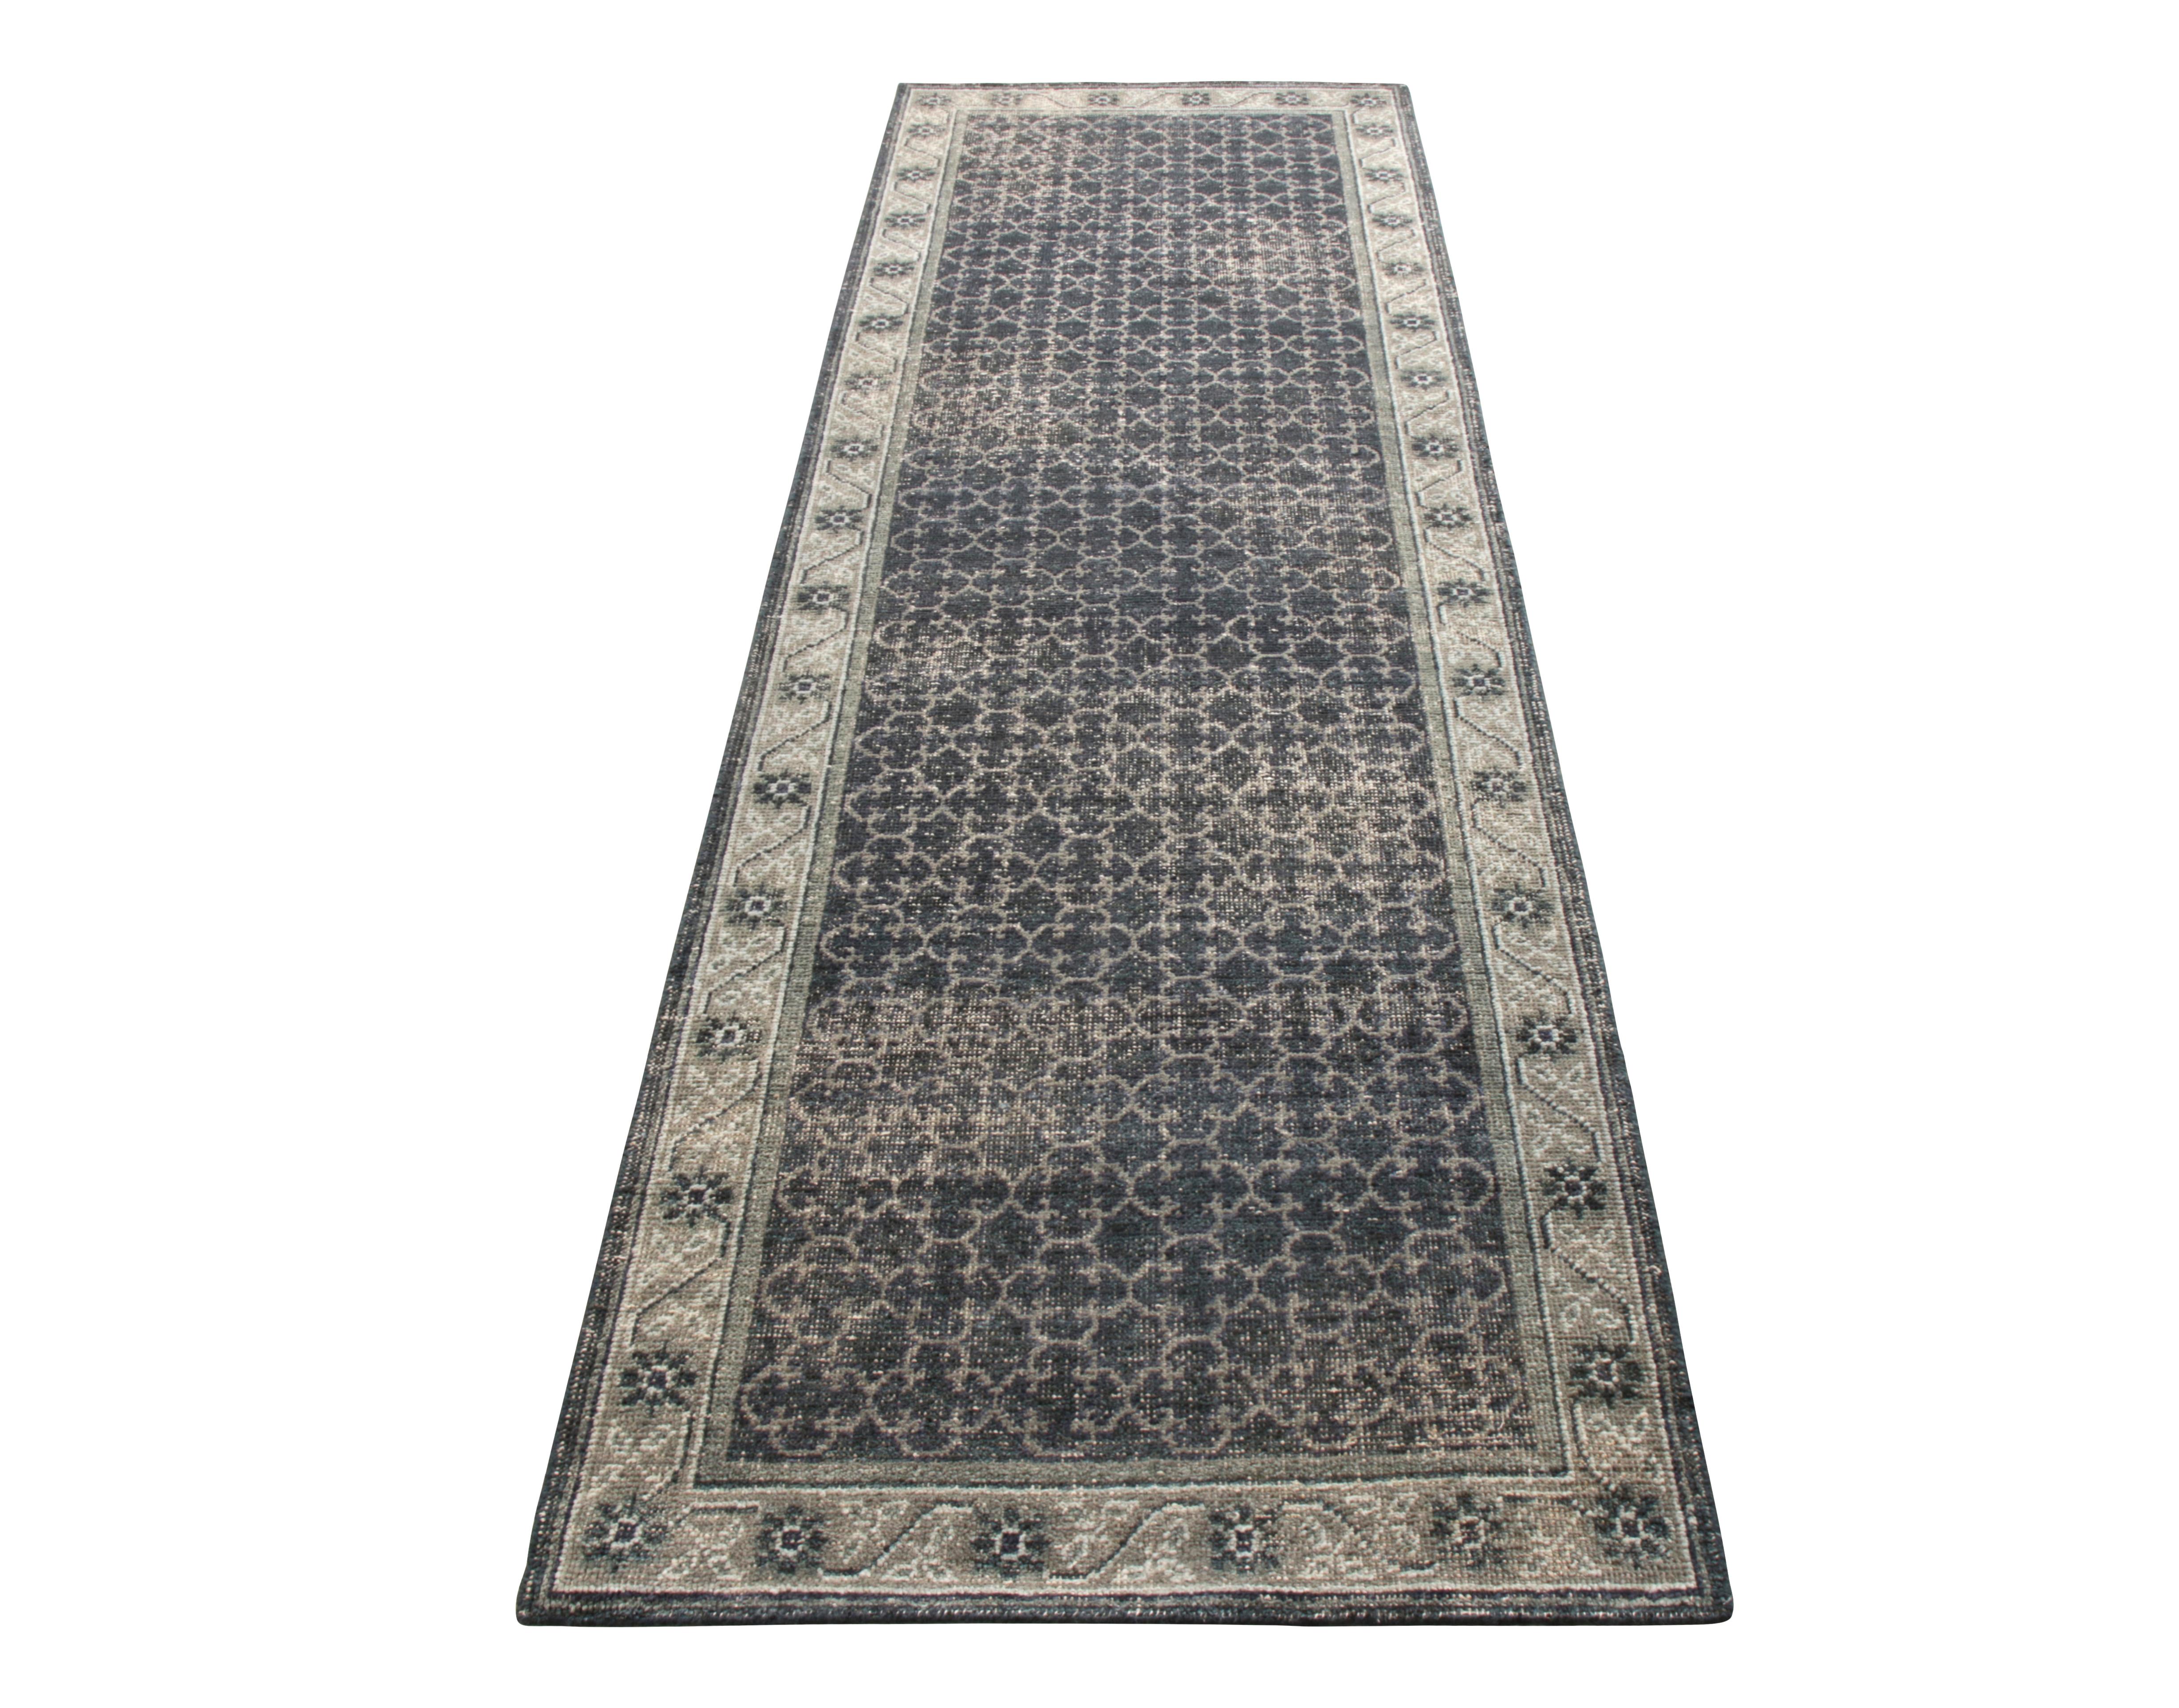 An ostentatious custom runner from Rug & Kilim’s Homage Collection. This 3 x 10 boasts a calming personality in a soothing blue colorway that elegantly complements its intricate geometric pattern with subtle gray accent—sitting beautifully in this